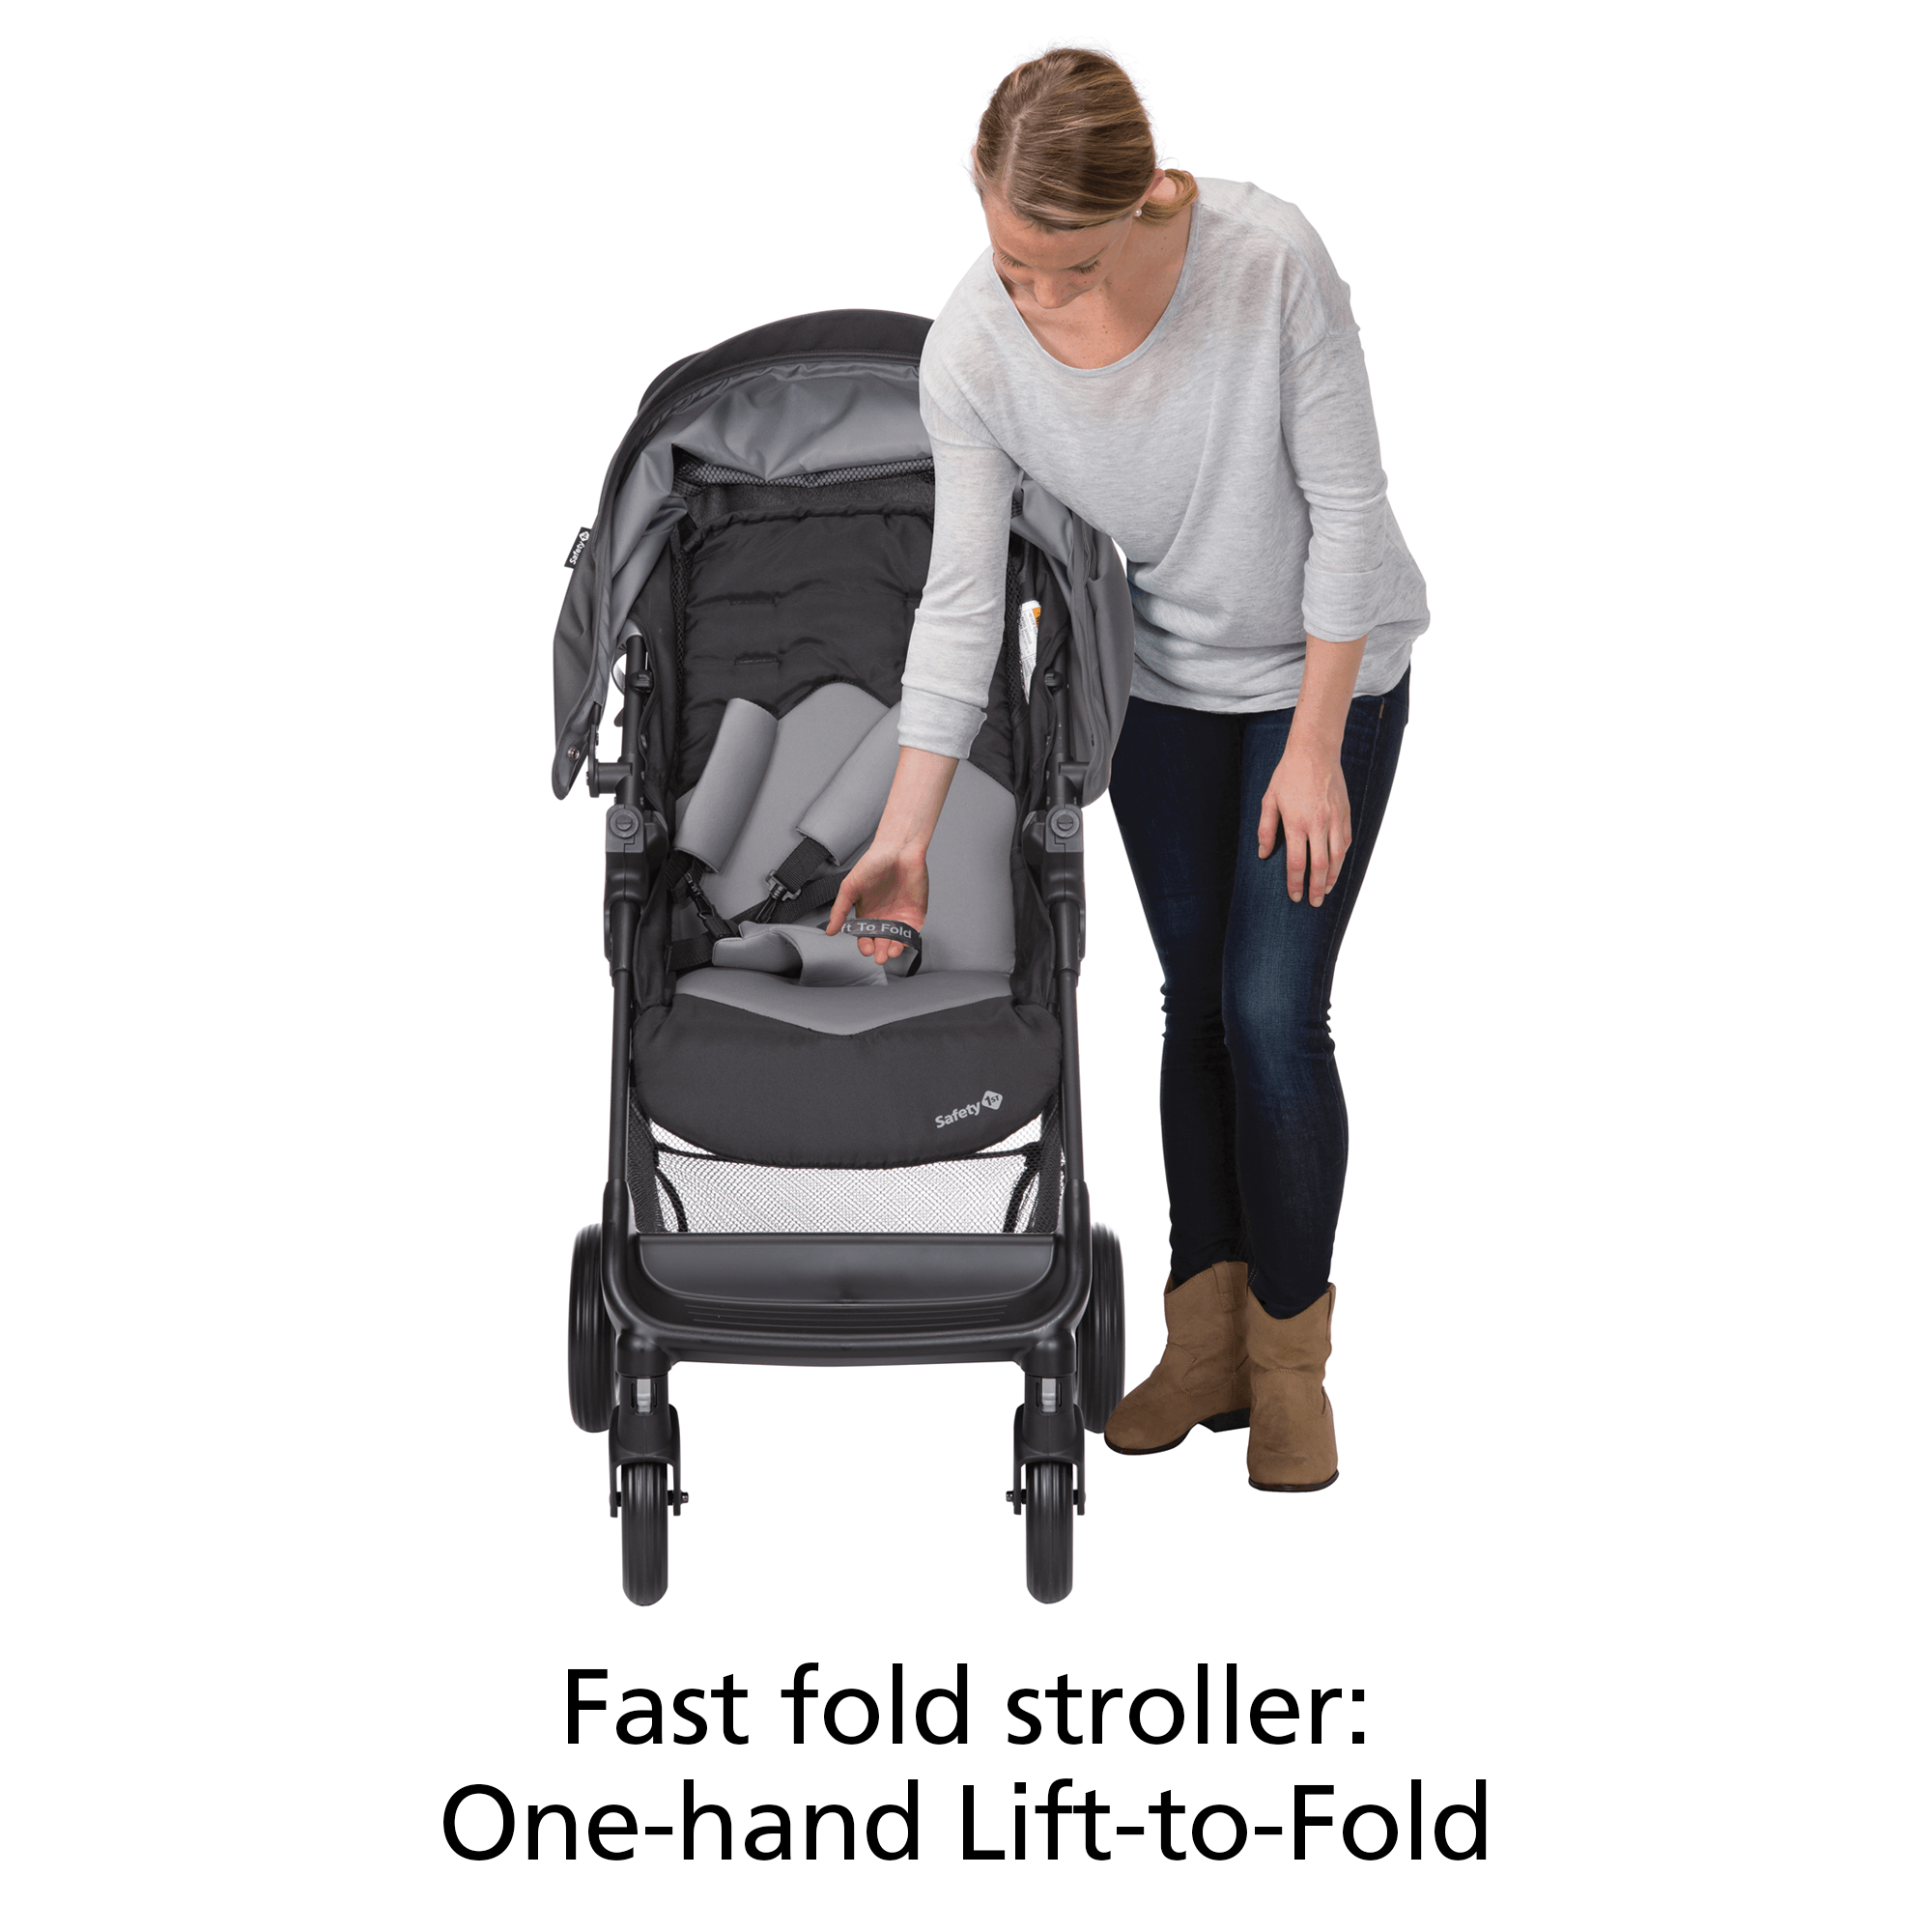 Fast fold stroller: One-hand Lift-to-fold